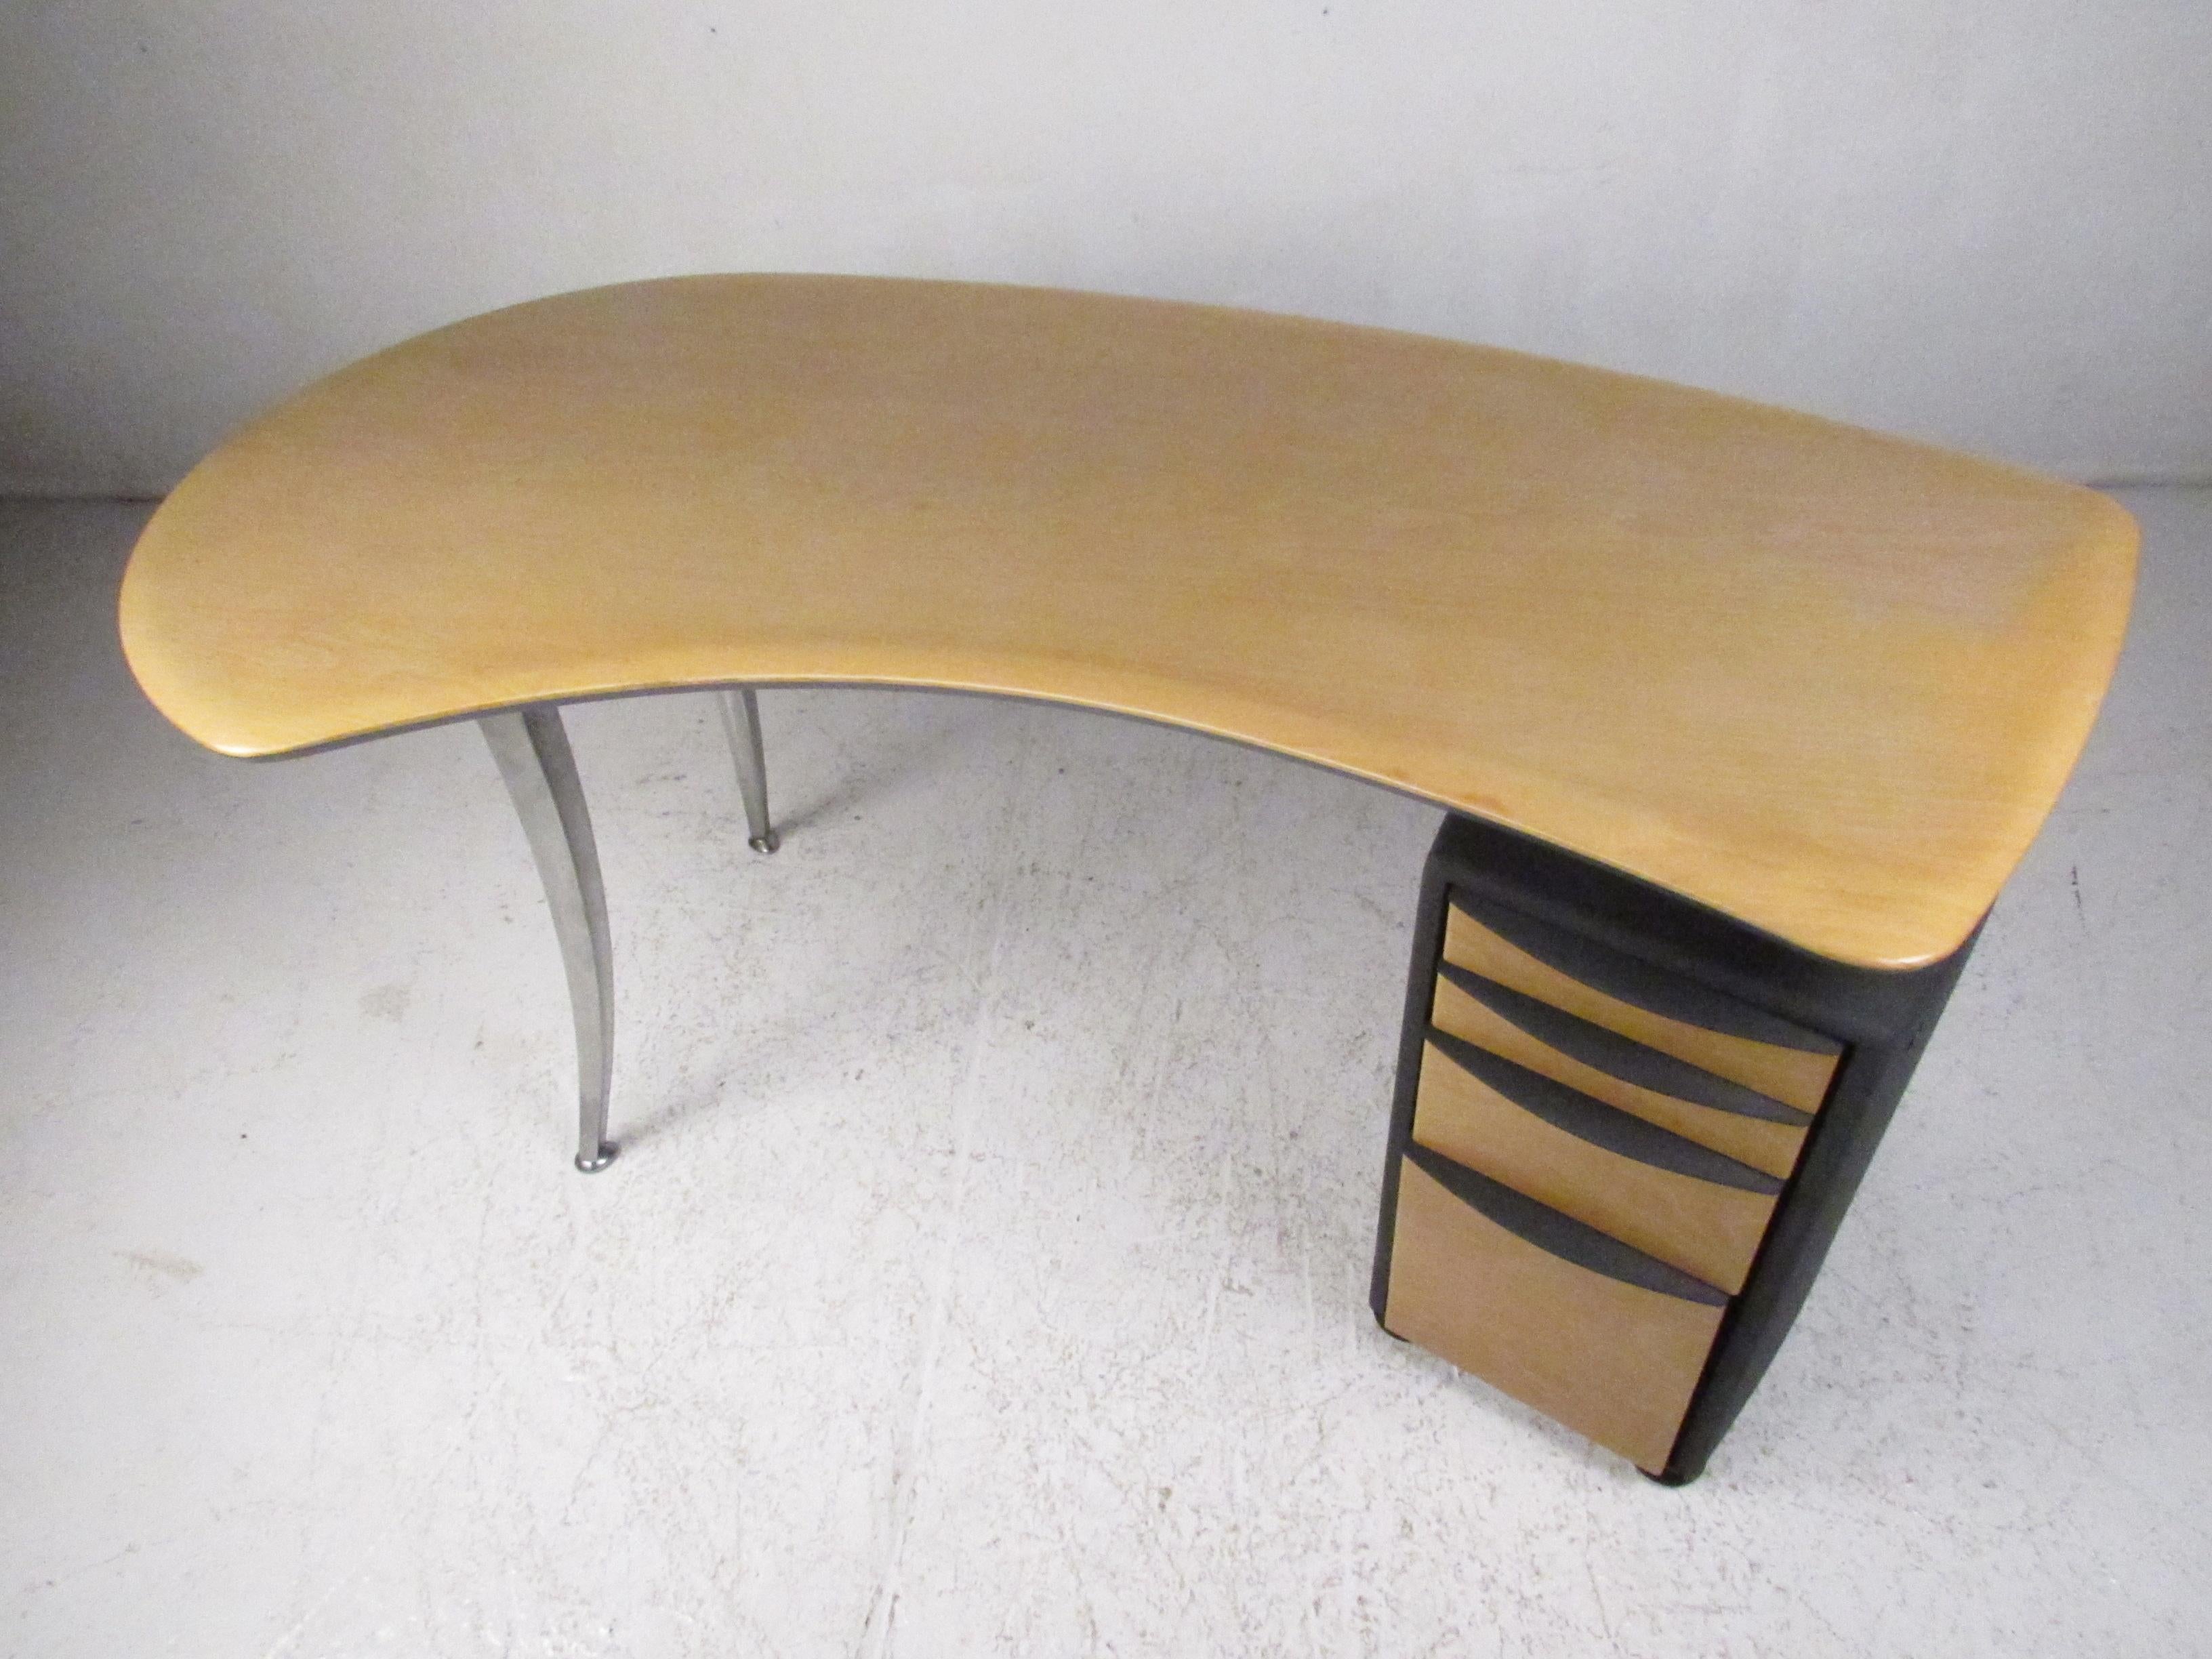 This stunning vintage modern desk boasts curved aluminum legs designed after Luigi Origlia. A lovely two-tone design with a blonde wood top and a thick textured plastic casing. A compact case piece with four hefty drawers that provides ample storage